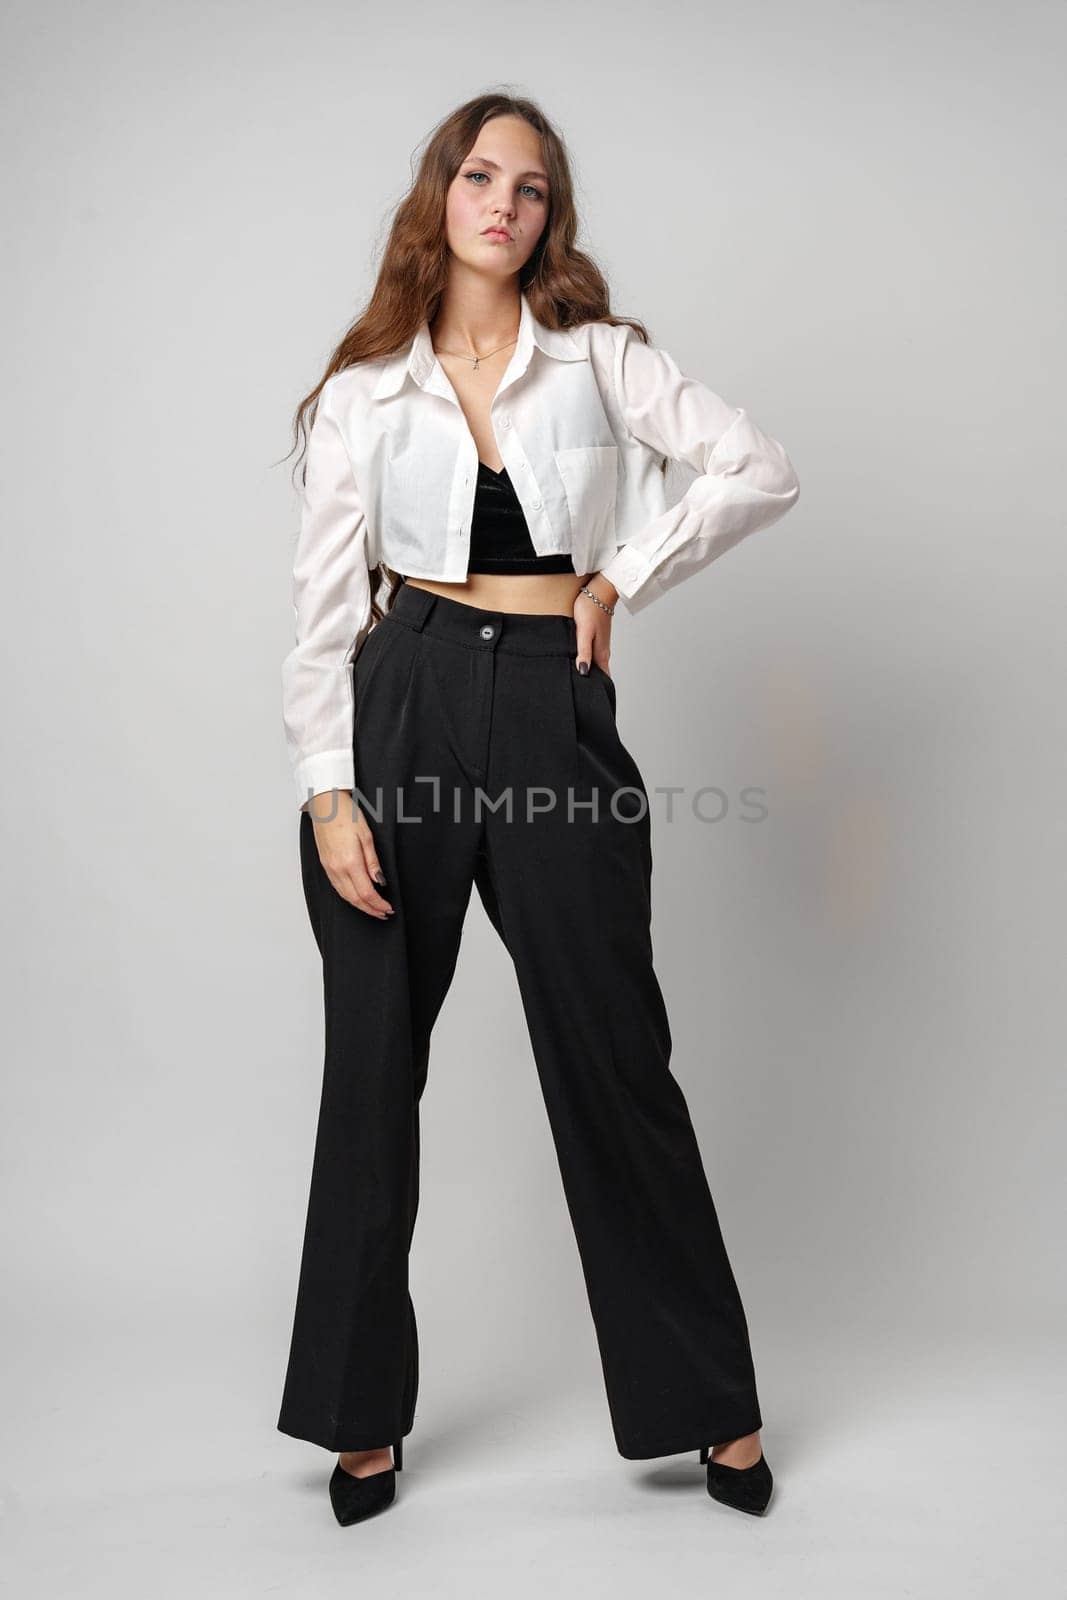 Confident Young Woman Posing in Stylish Business Casual Attire Against Neutral Background by Fabrikasimf